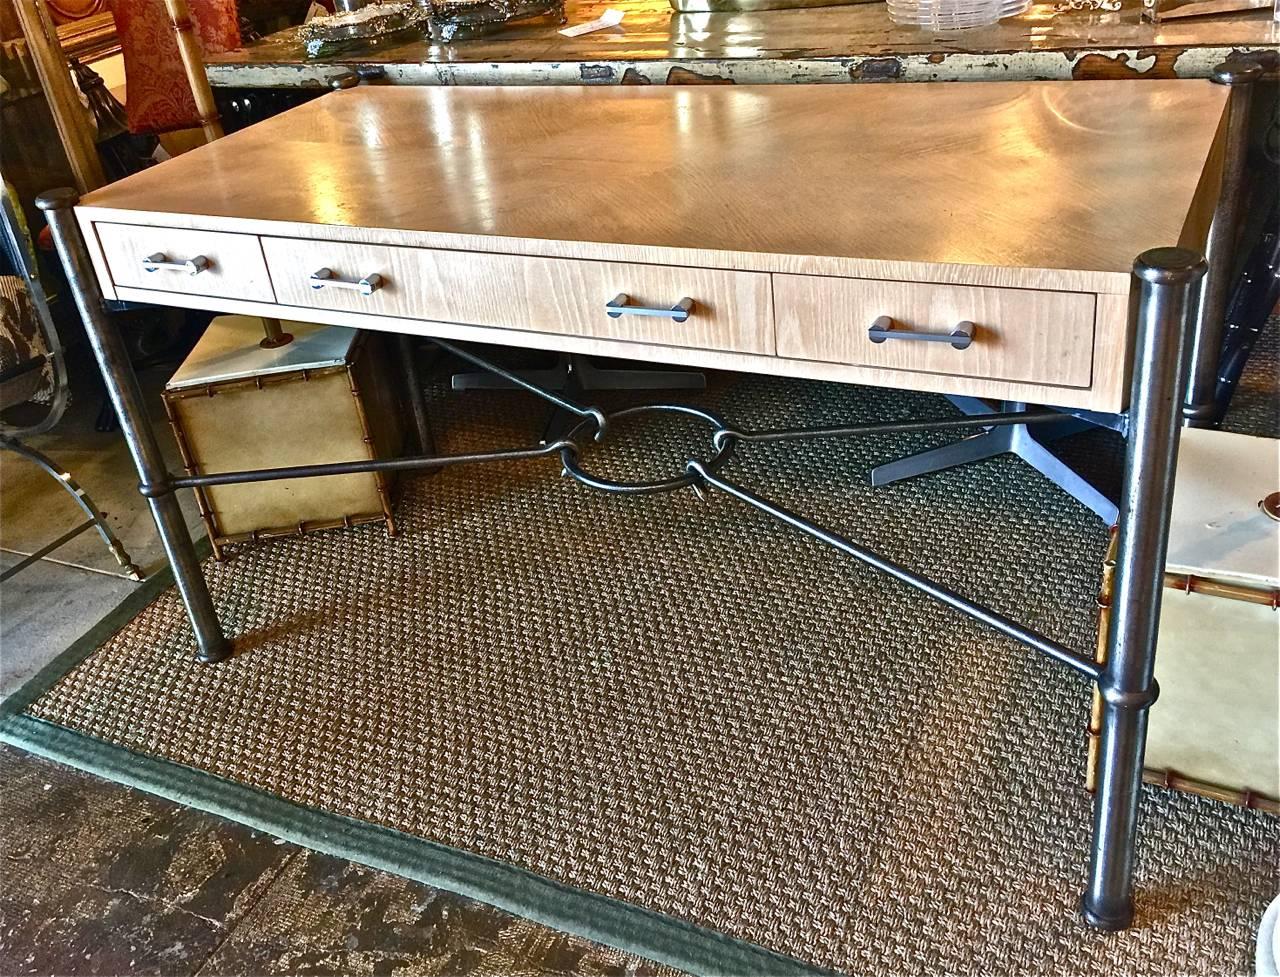 This is a stunning Jay Spectre for century writing desk that dates to circa 1970-80. The desk features a three drawer cerused oak writing surface supported by ringed steel columns with a forged iron center stretcher. The desk is in very good